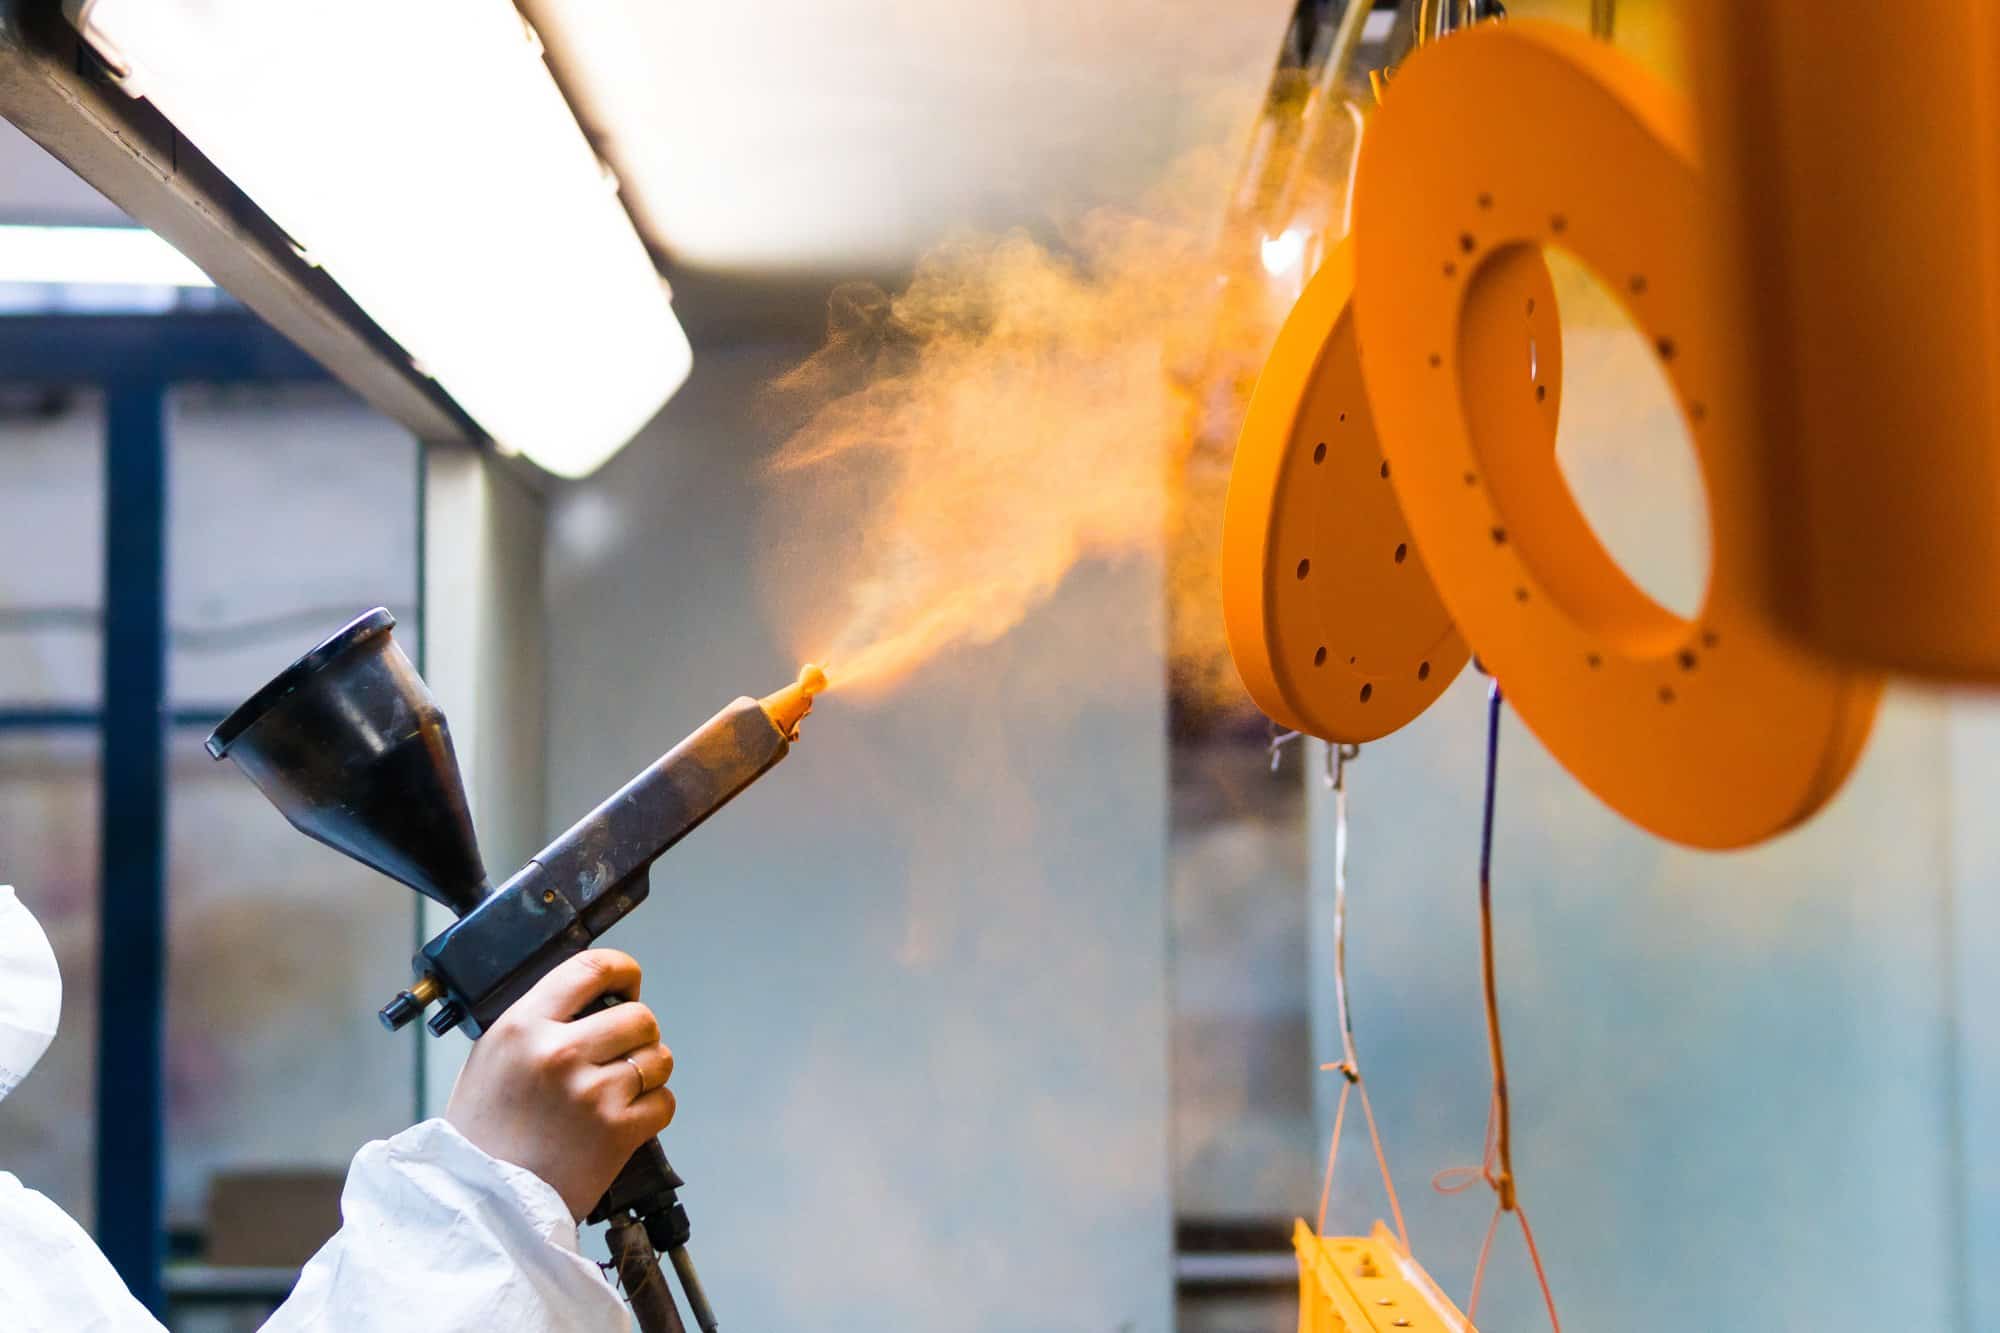 Coatings 101: Everything You Need to Know About Plasma Spray Coating